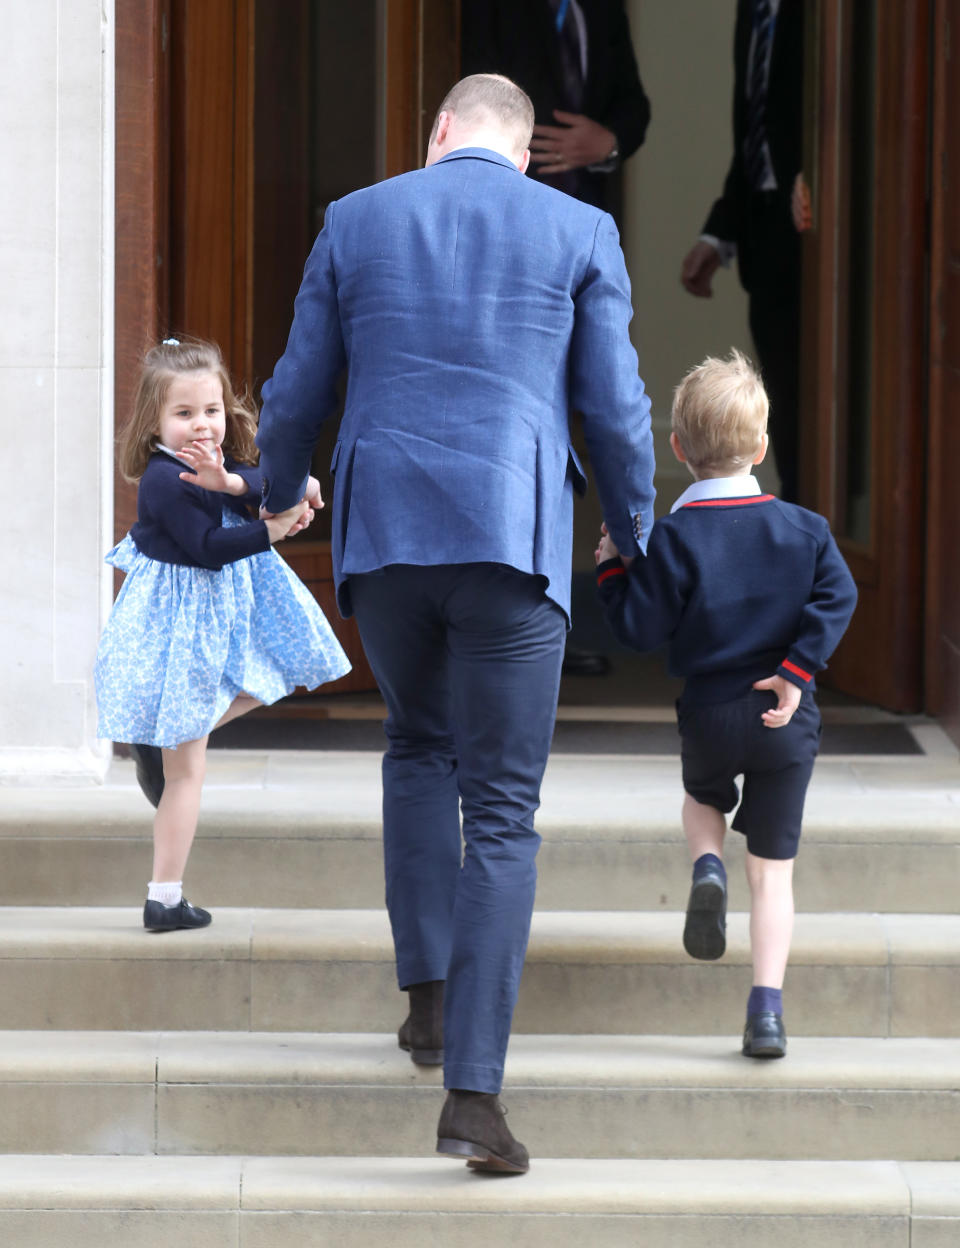 Chris said he loves ‘feel-good’ moments such as a royal birth, when he feels like he’s ‘part of history’ and one of his favourite parts of the job is snapping the adorable royal kids. Photo: Getty Images/Chris Jackson